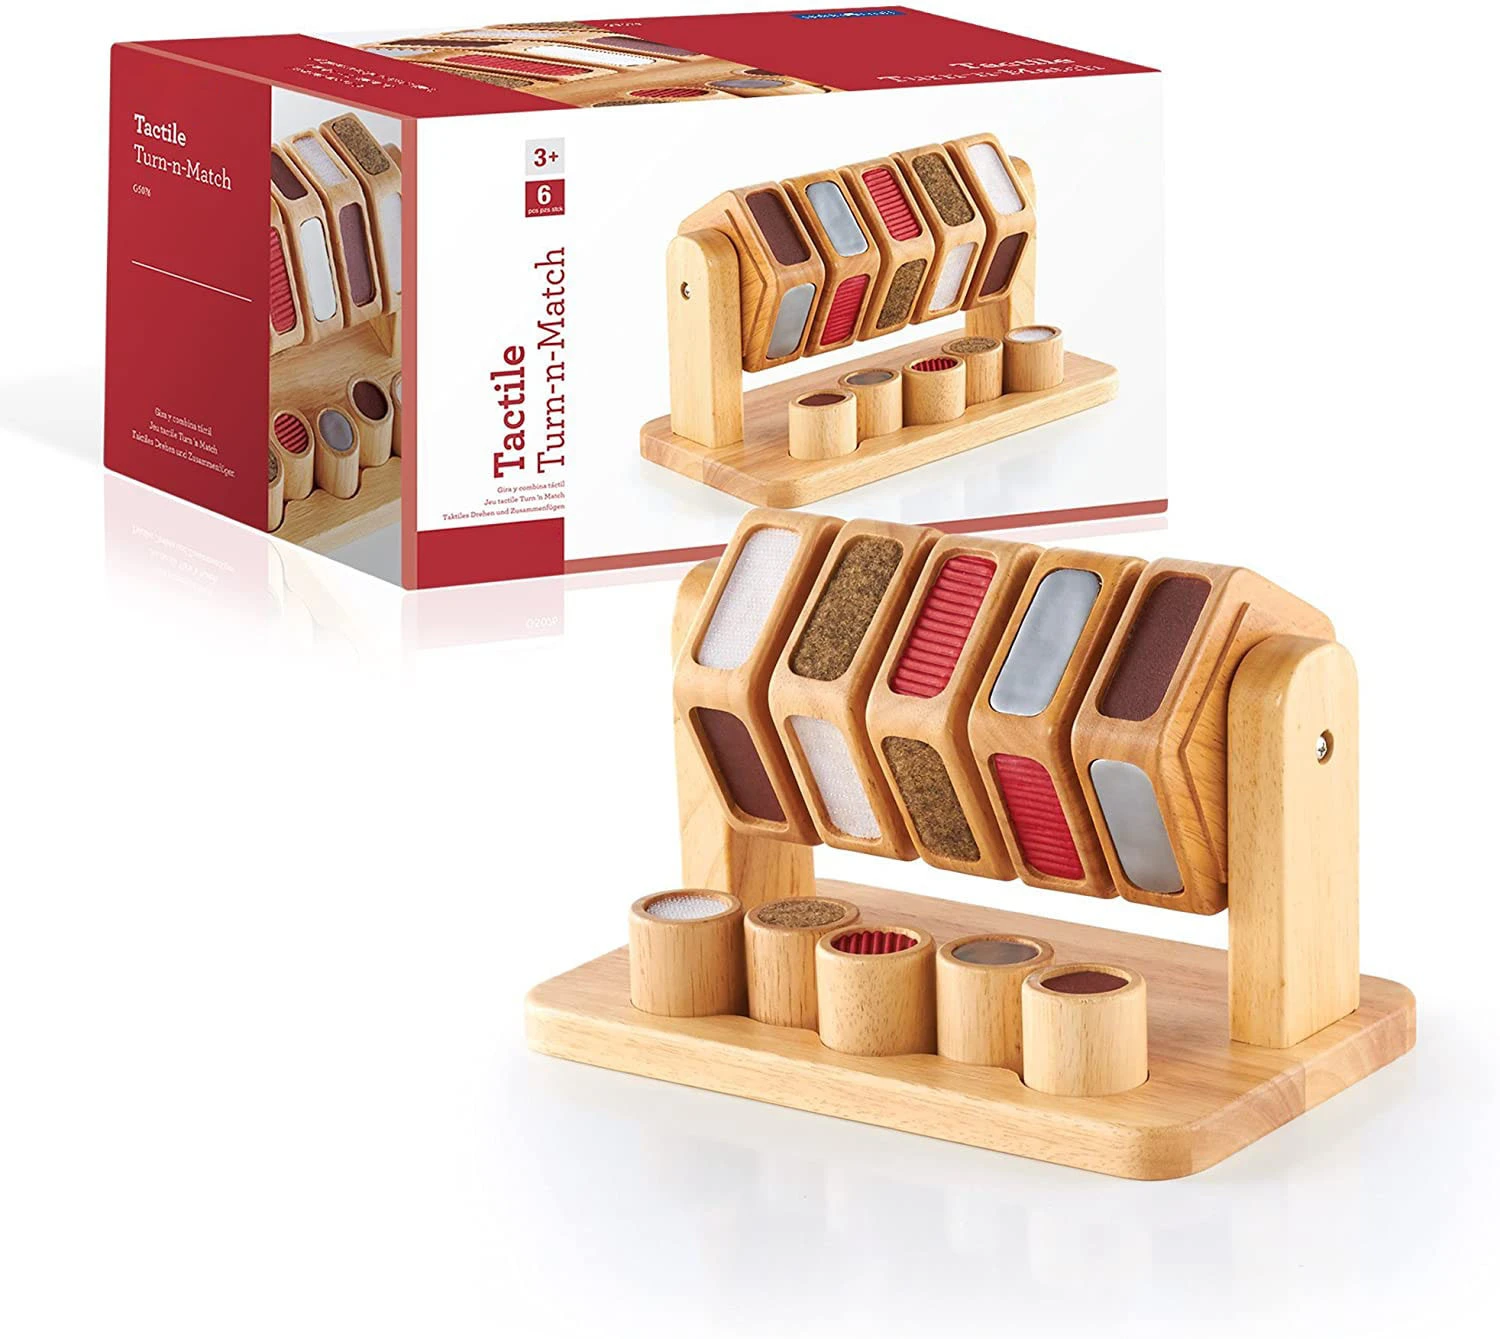 Comfortable New Design Wooden Toys Montessori Teaching Tactile Turn &#x27;N Match Play Set Kids Early Learning Development Toy